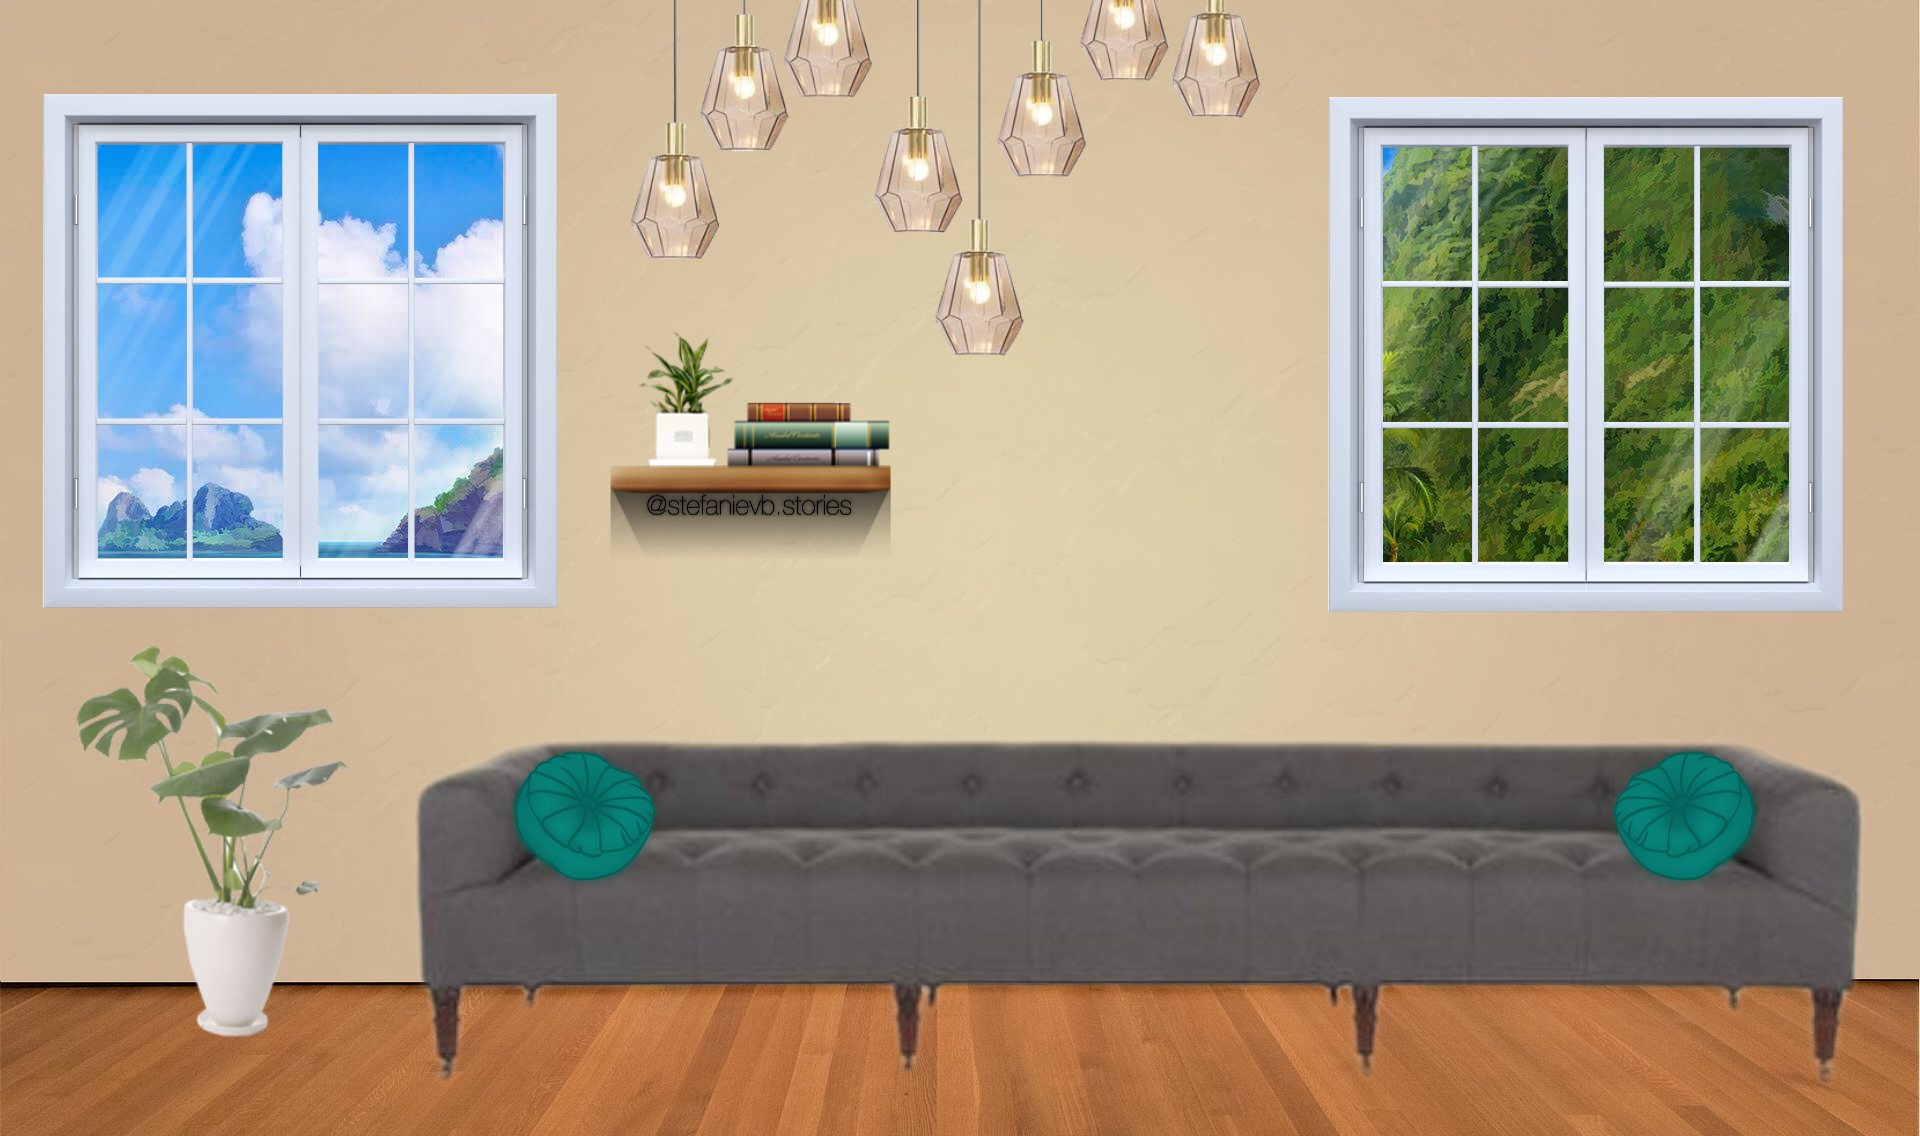 INT. BEACH LIVING ROOM – DAY